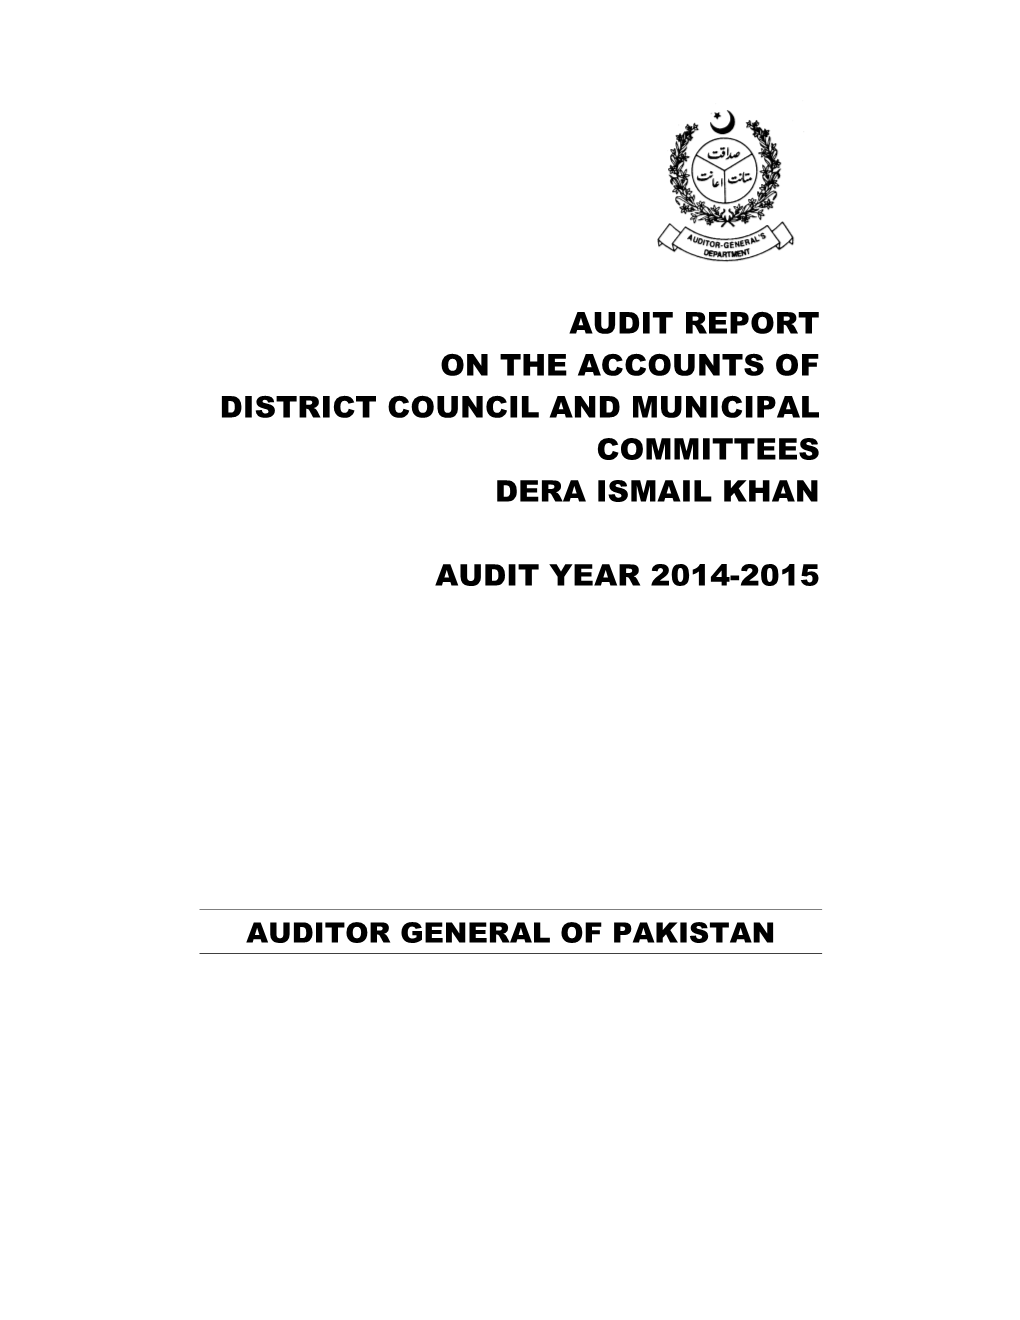 Audit Report on the Accounts of District Council and Municipal Committees Dera Ismail Khan